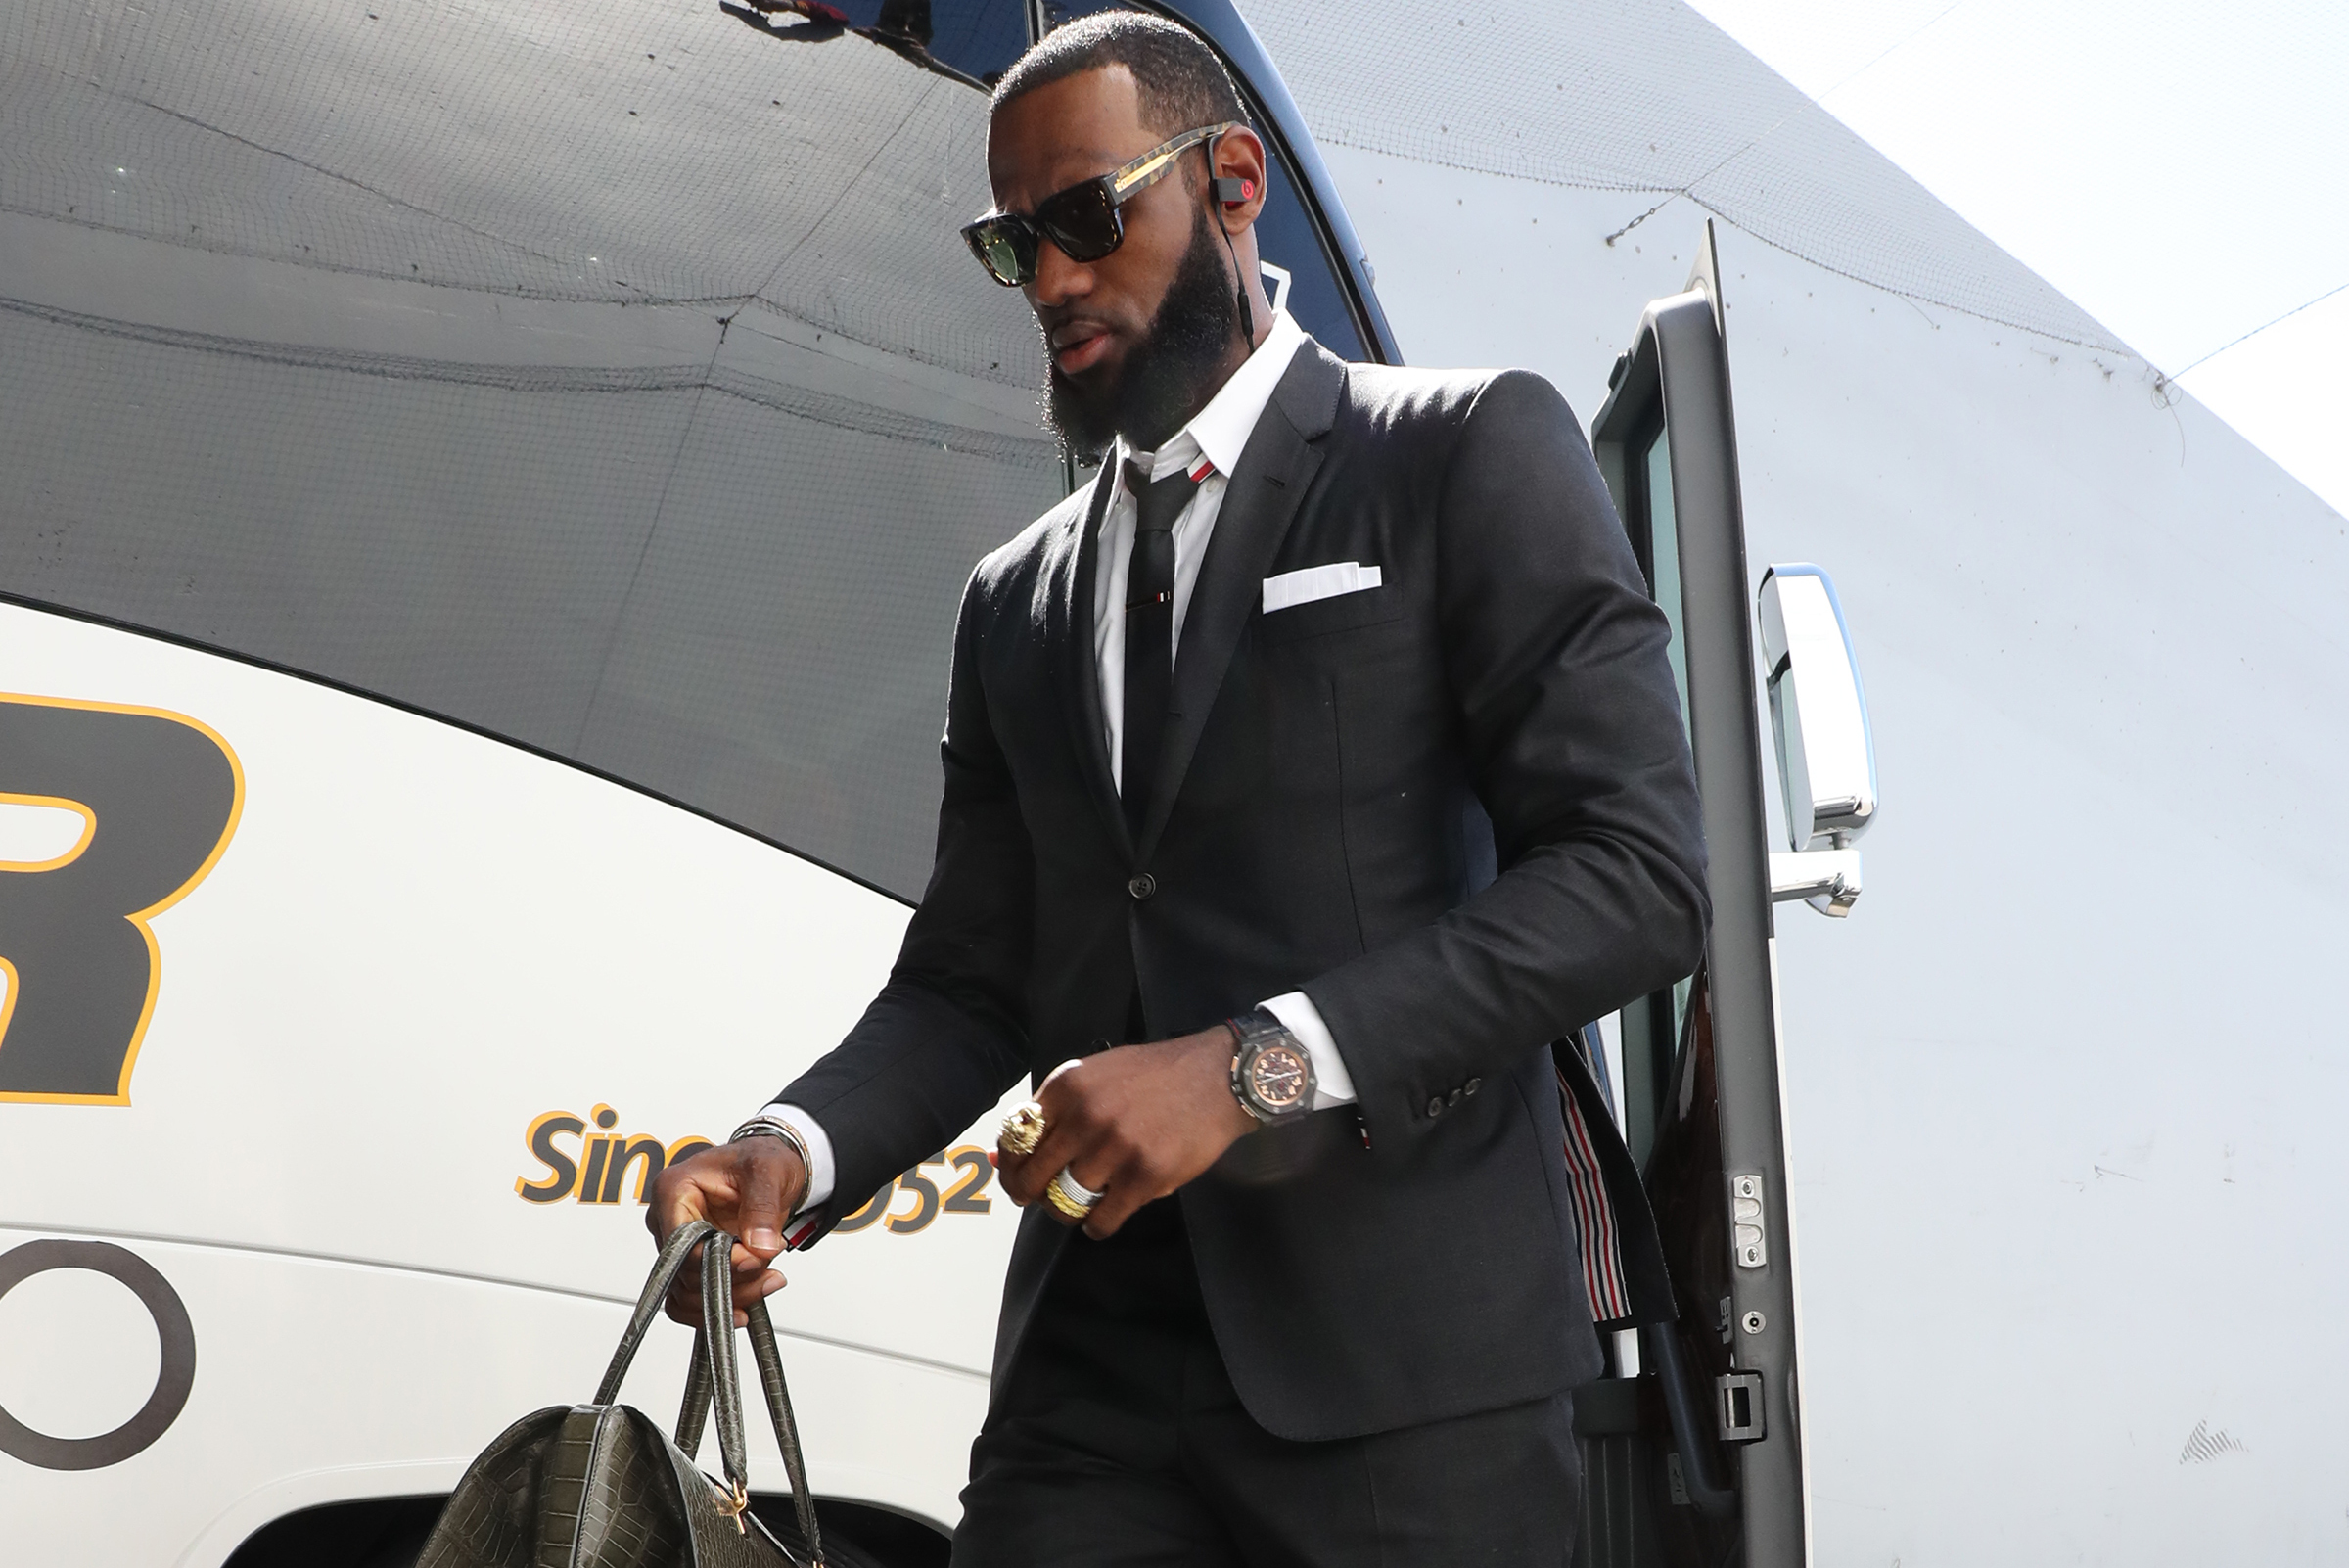 See LeBron James' greatest suits through the years, from oversized to chic